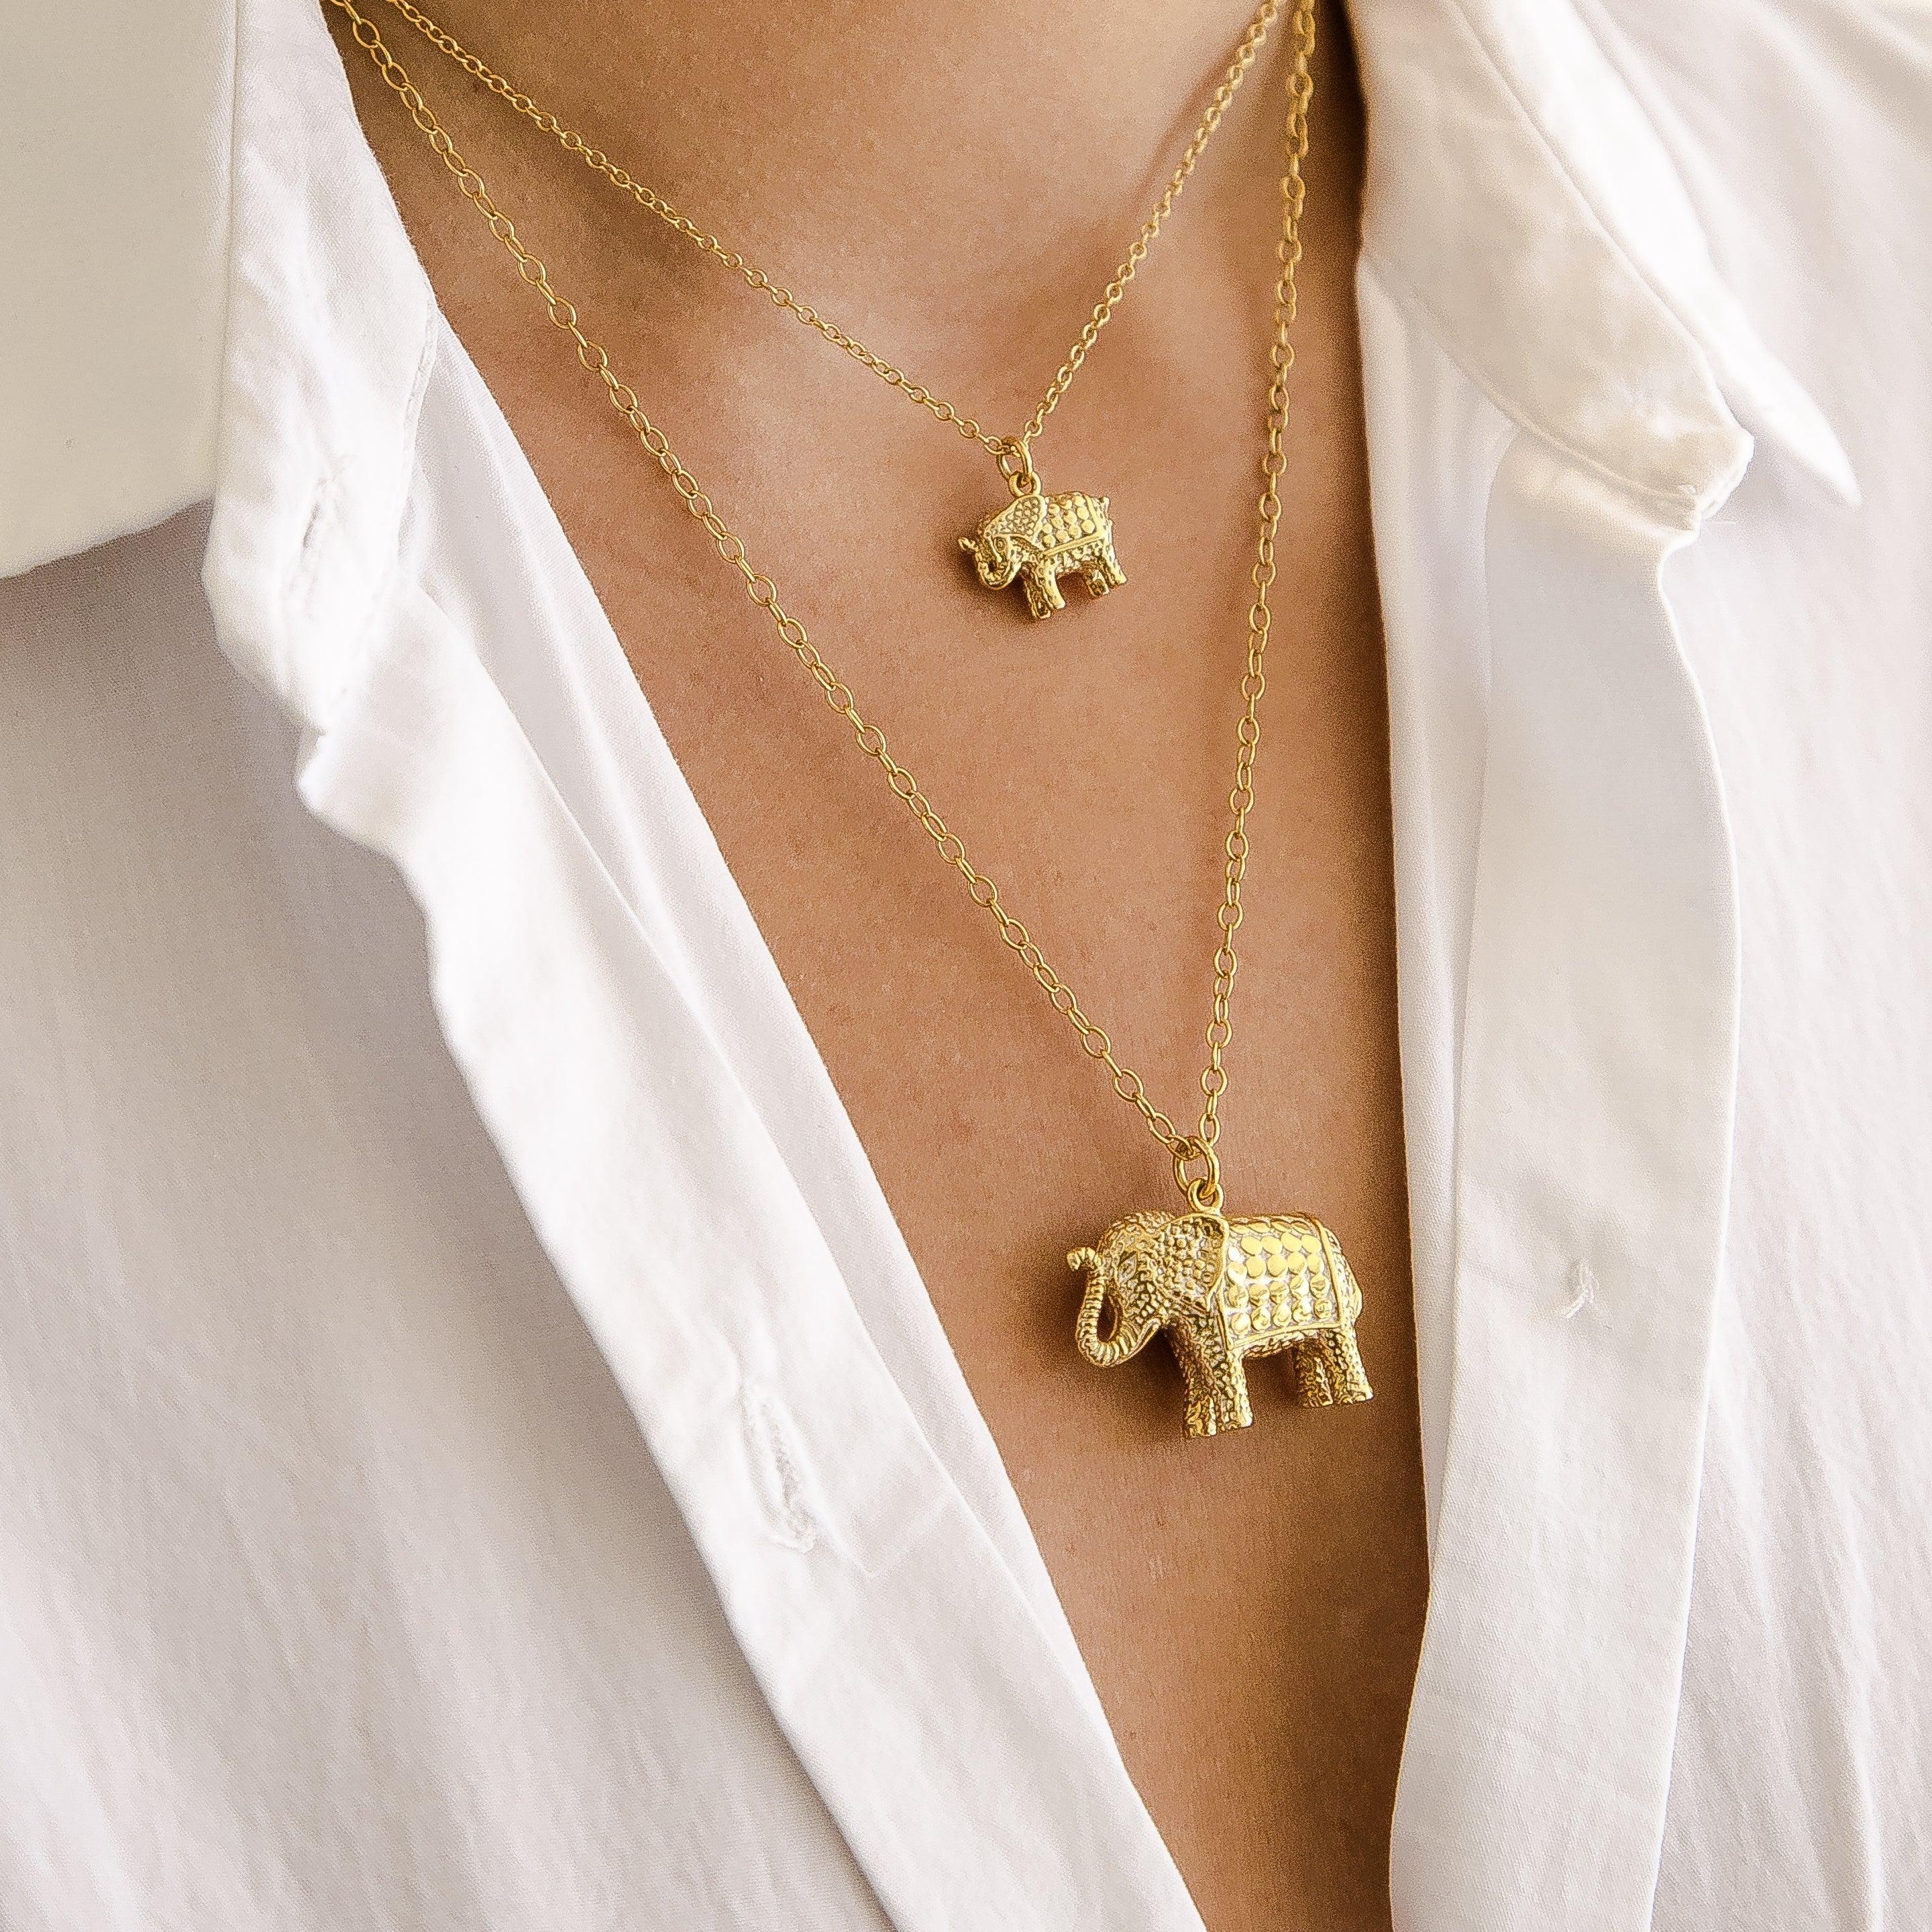 Small Elephant Charm Necklace